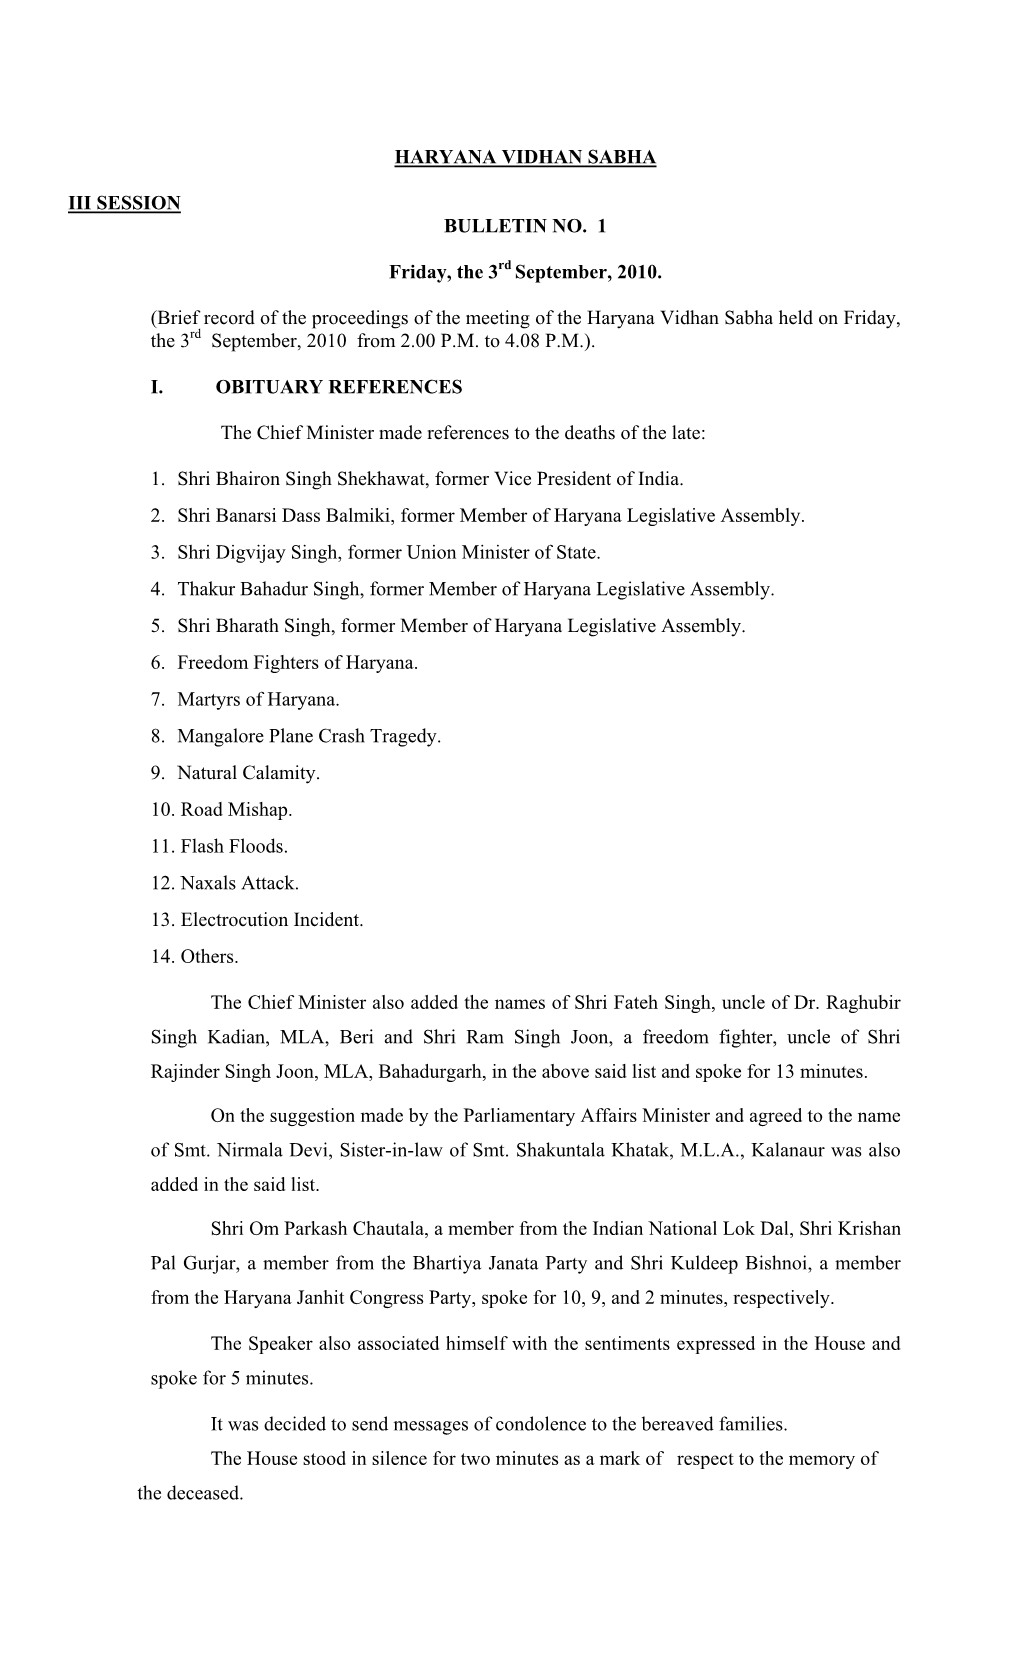 HARYANA VIDHAN SABHA III SESSION BULLETIN NO. 1 Friday, the 3 September, 2010. (Brief Record of the Proceedings of the Meeting